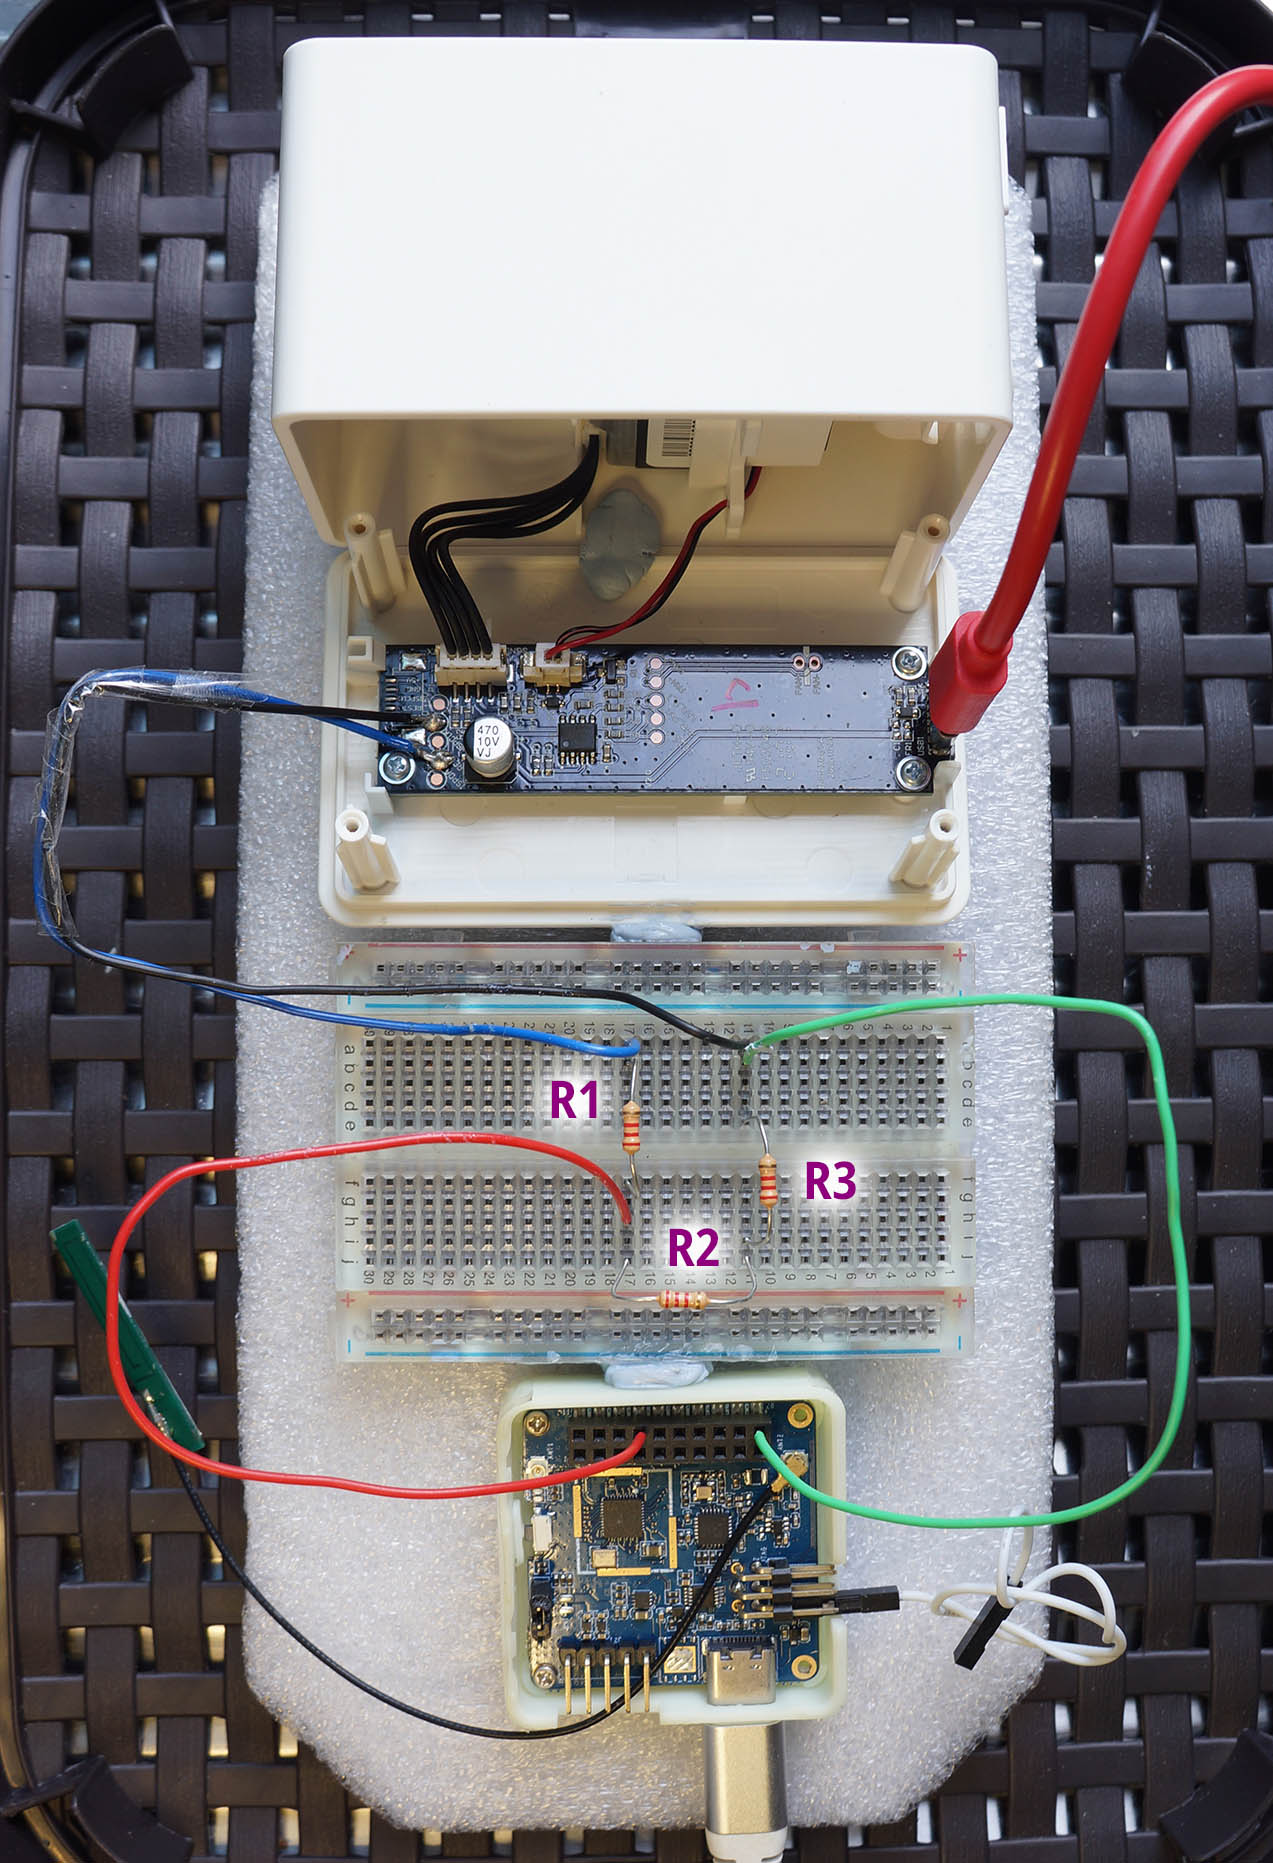 IKEA VINDRIKTNING Air Quality Sensor connected to Pine64 PineDio Stack BL604 RISC-V Board with Voltage Divider